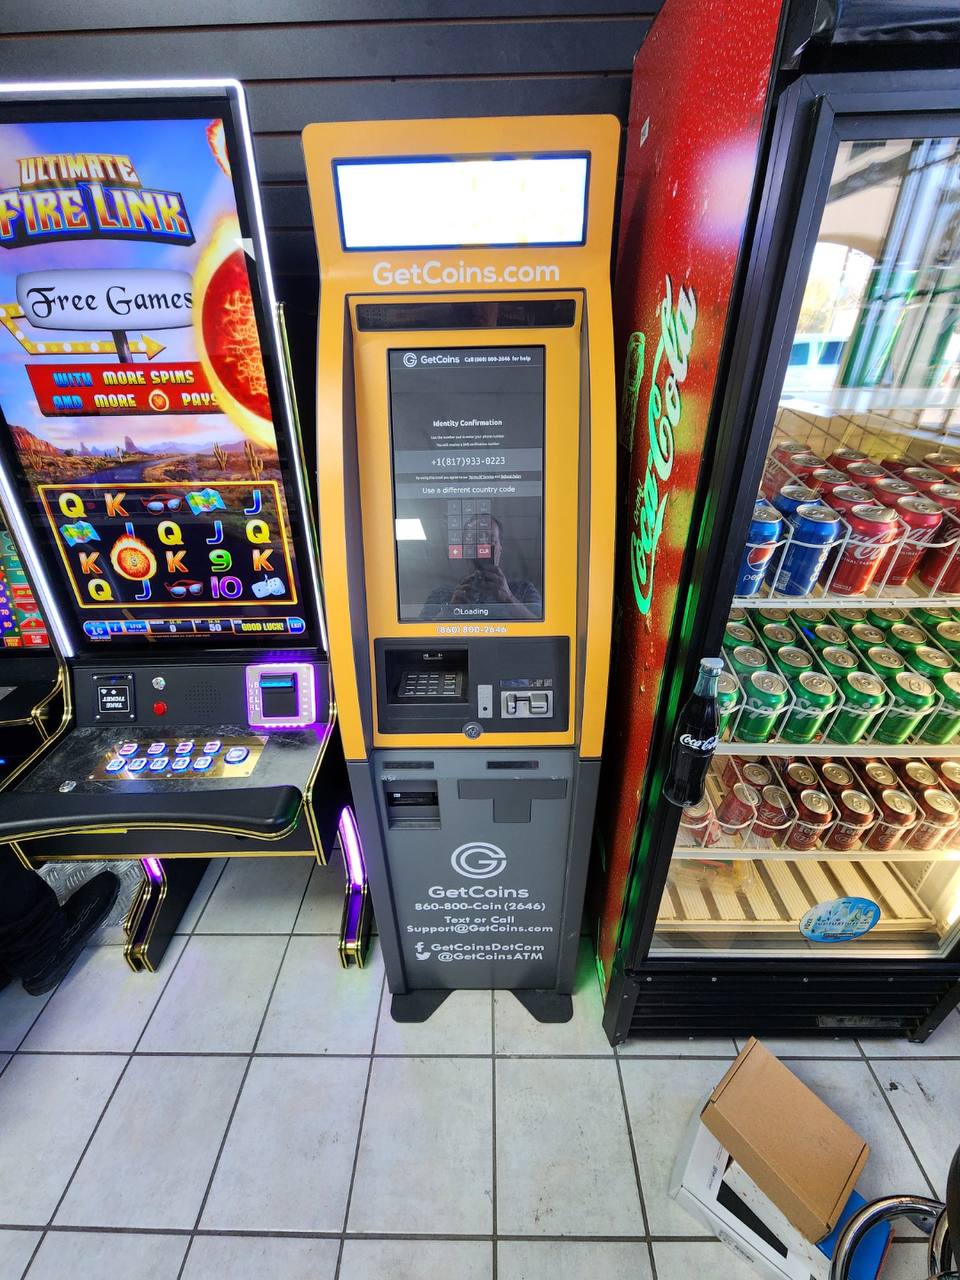 Getcoins - Bitcoin ATM - Inside of Smoke & Vape Zone in Fort Worth, Texas